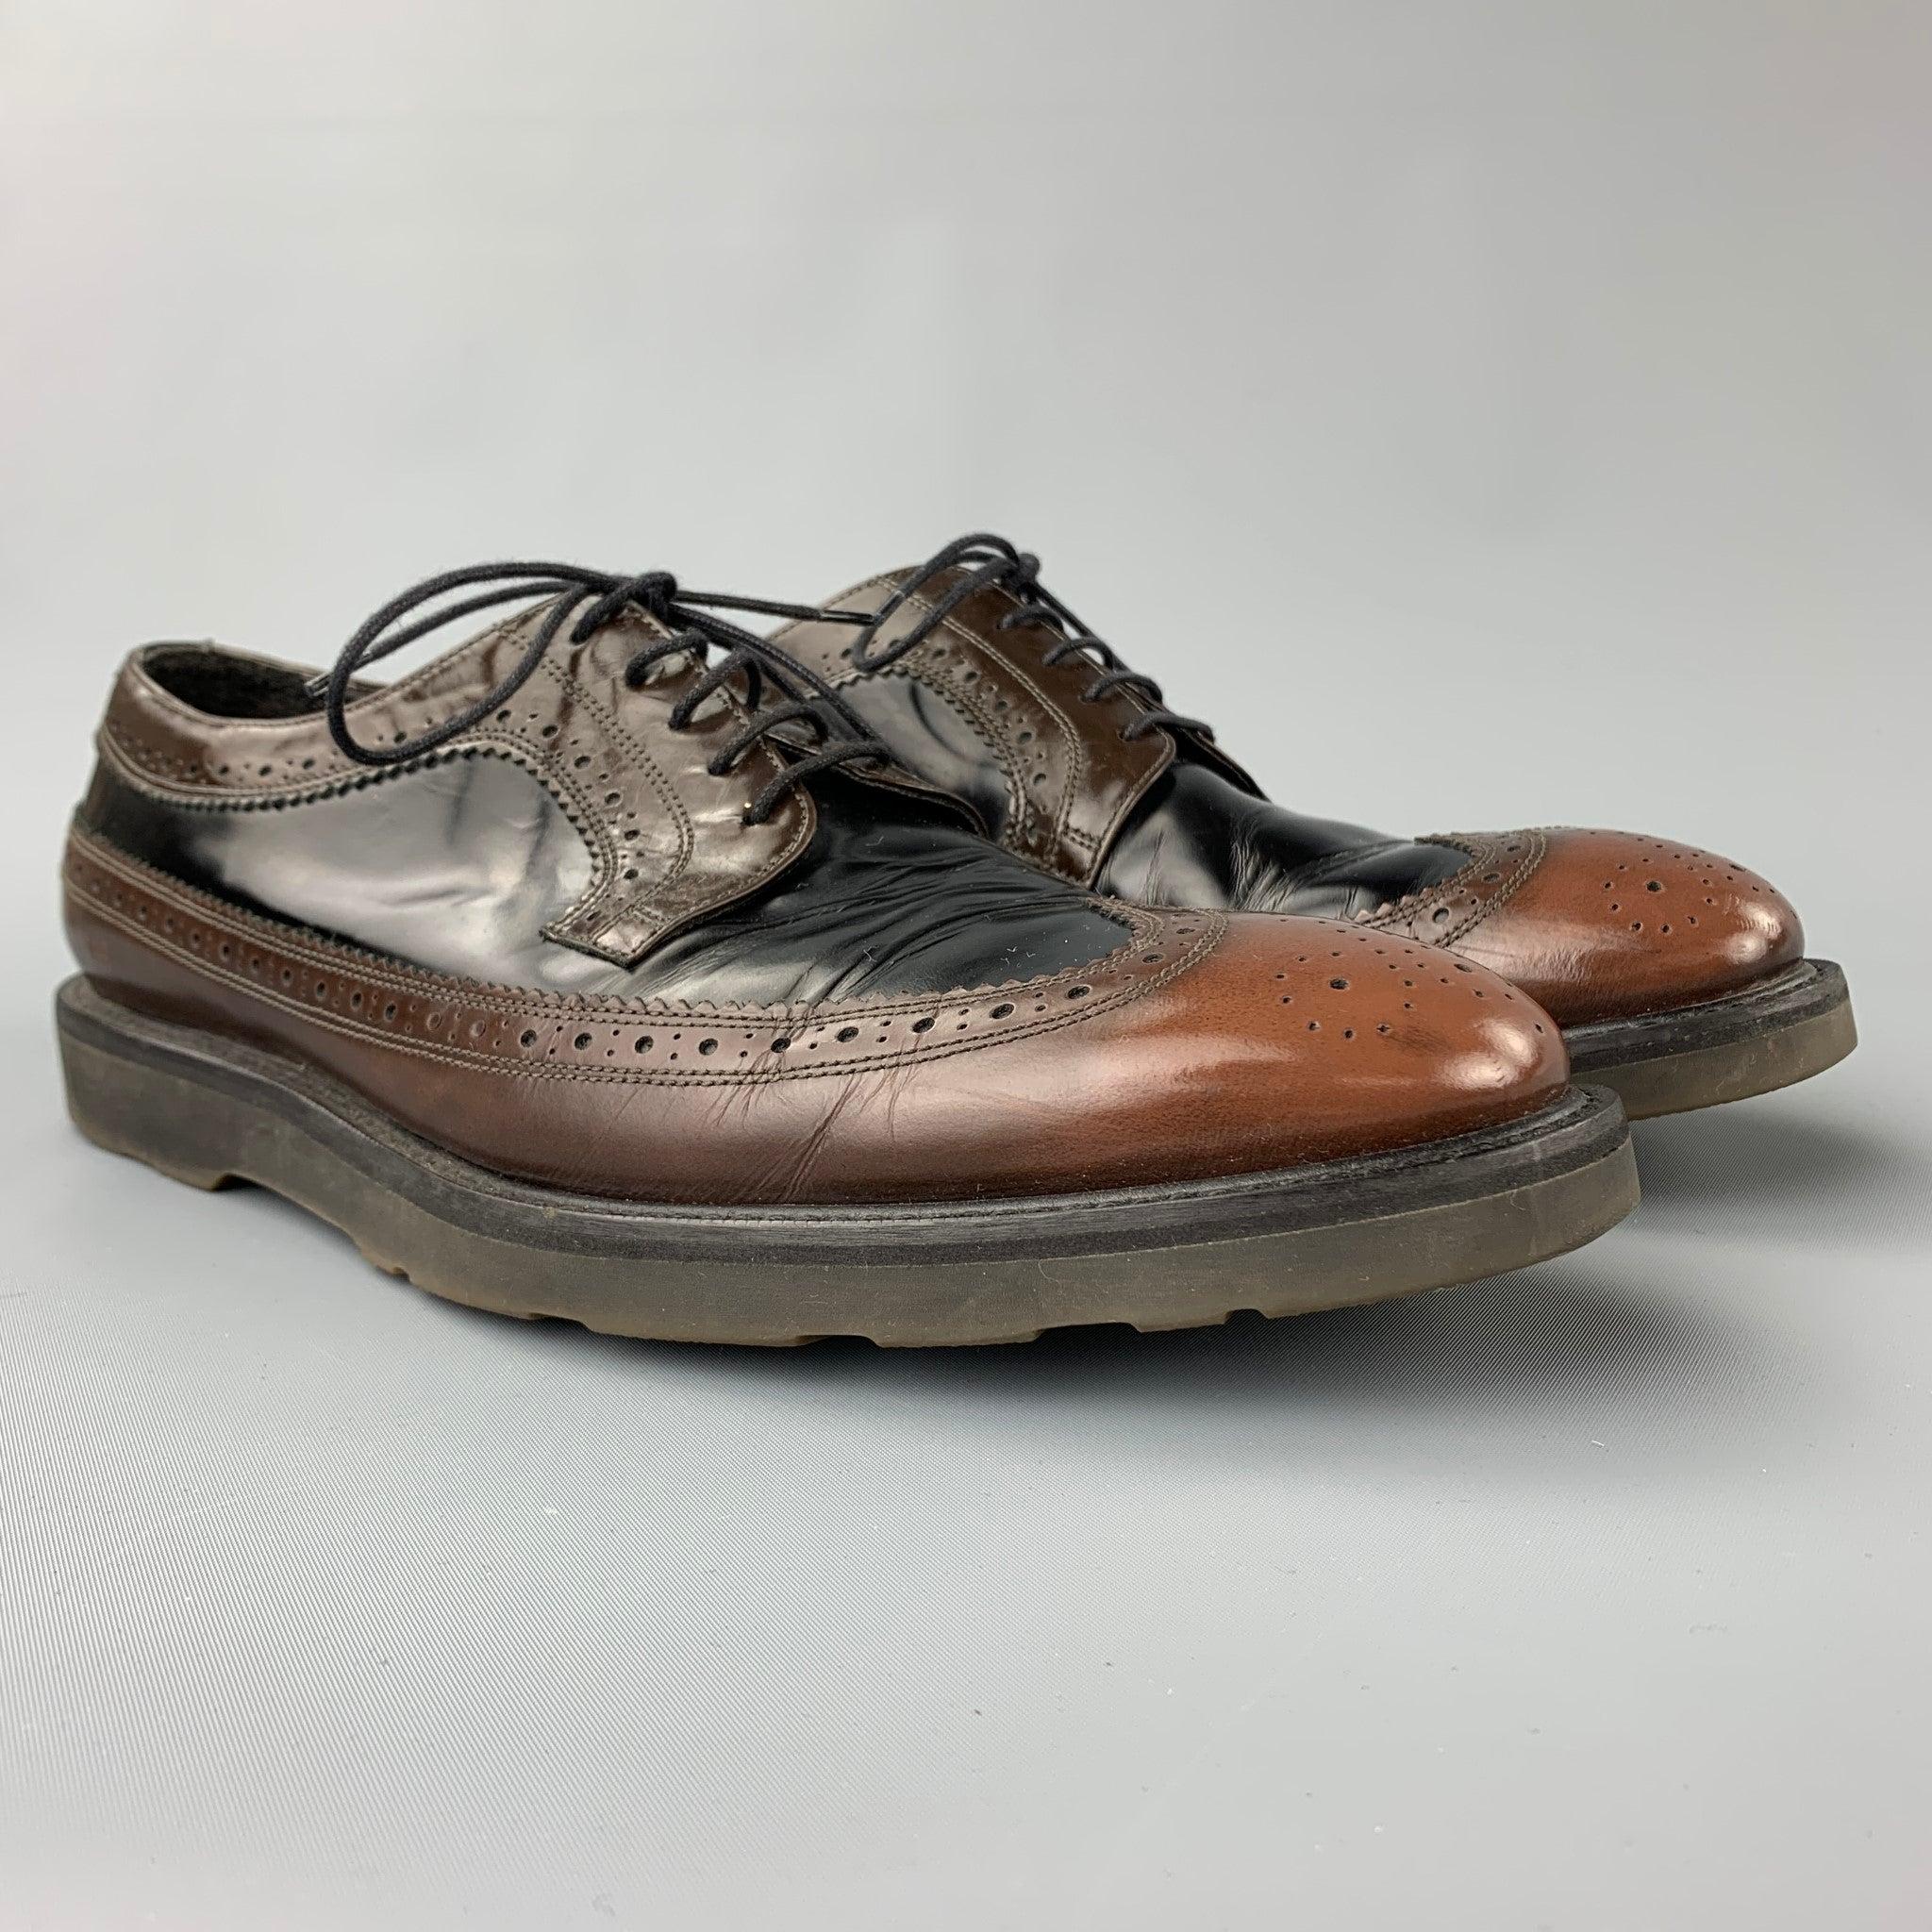 PAUL SMITH shoes comes in a black & brown perforated leather featuring a wingtip style, rubber sole, and a lace up closure.
Good
Pre-Owned Condition. 

Marked:   J119 EU 43.5Outsole:12.5 inches  x 4.5 inches 
  
  
 
Reference: 106568
Category: Lace